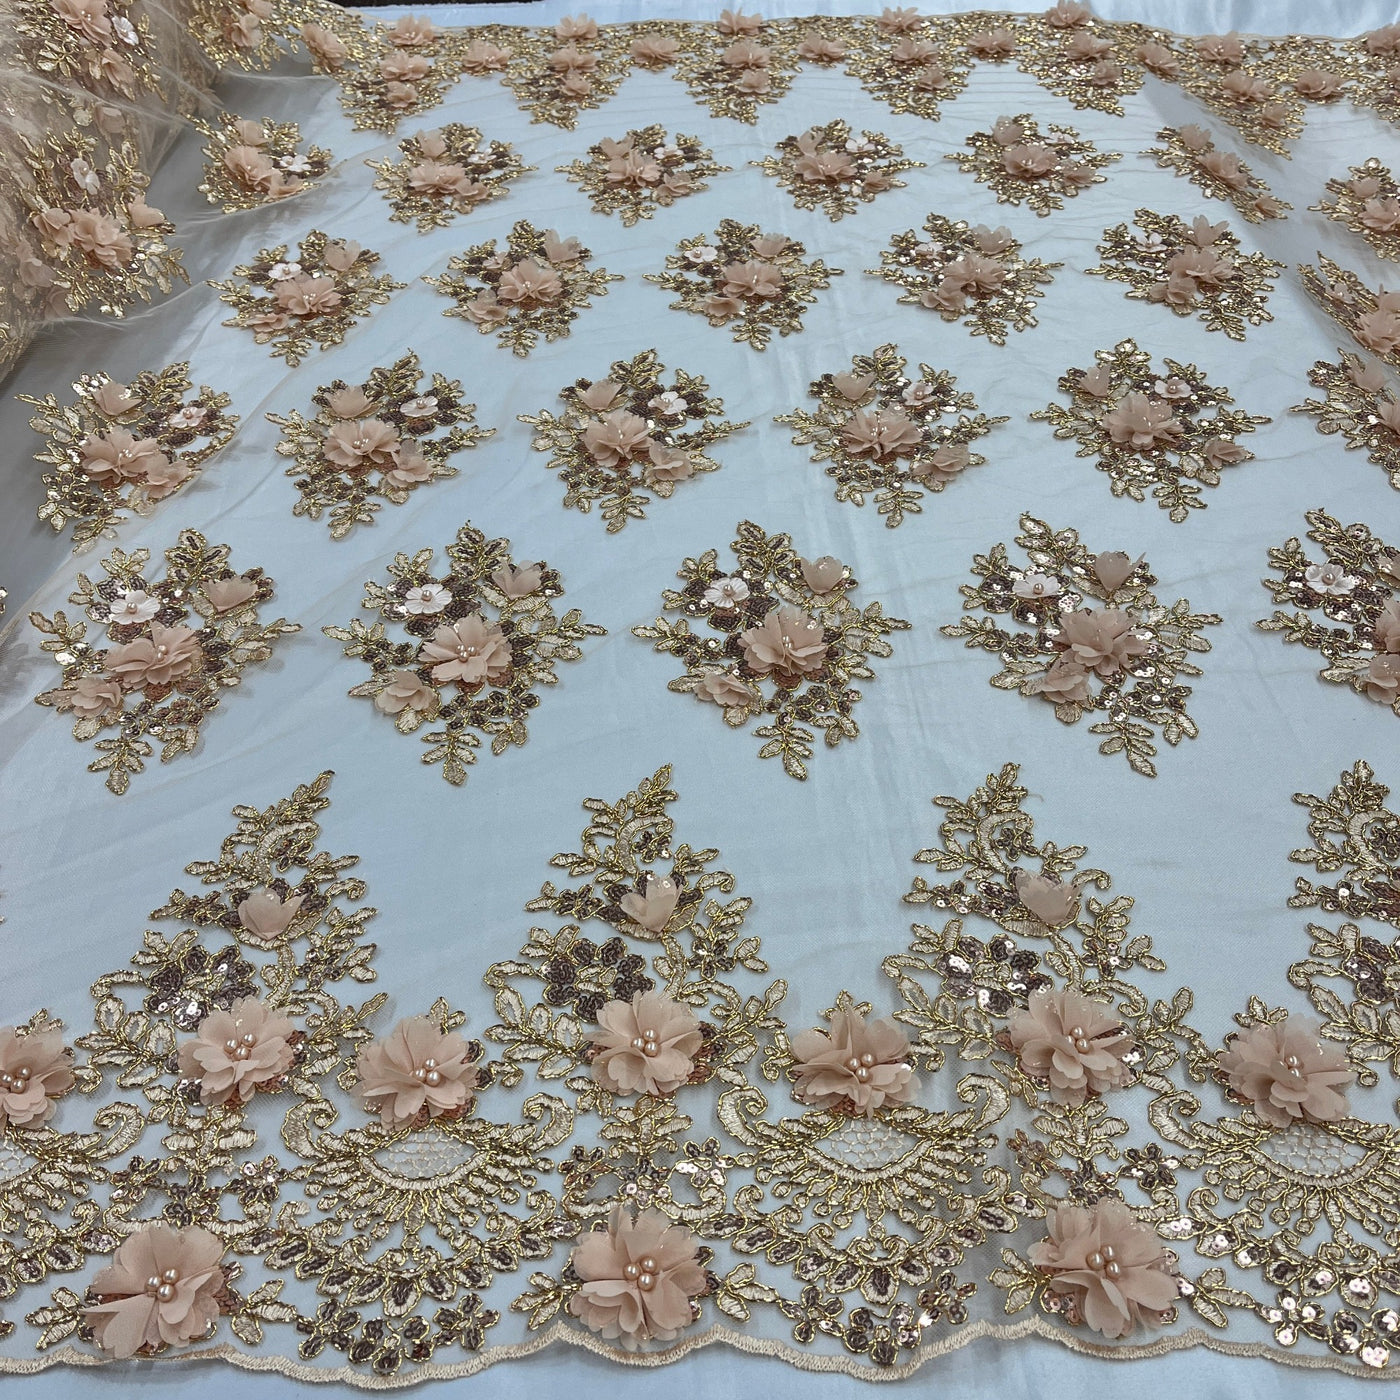 Beaded 3D Floral Lace Fabric Embroidered on 100% Polyester Net Mesh | Lace USA - GD-2702